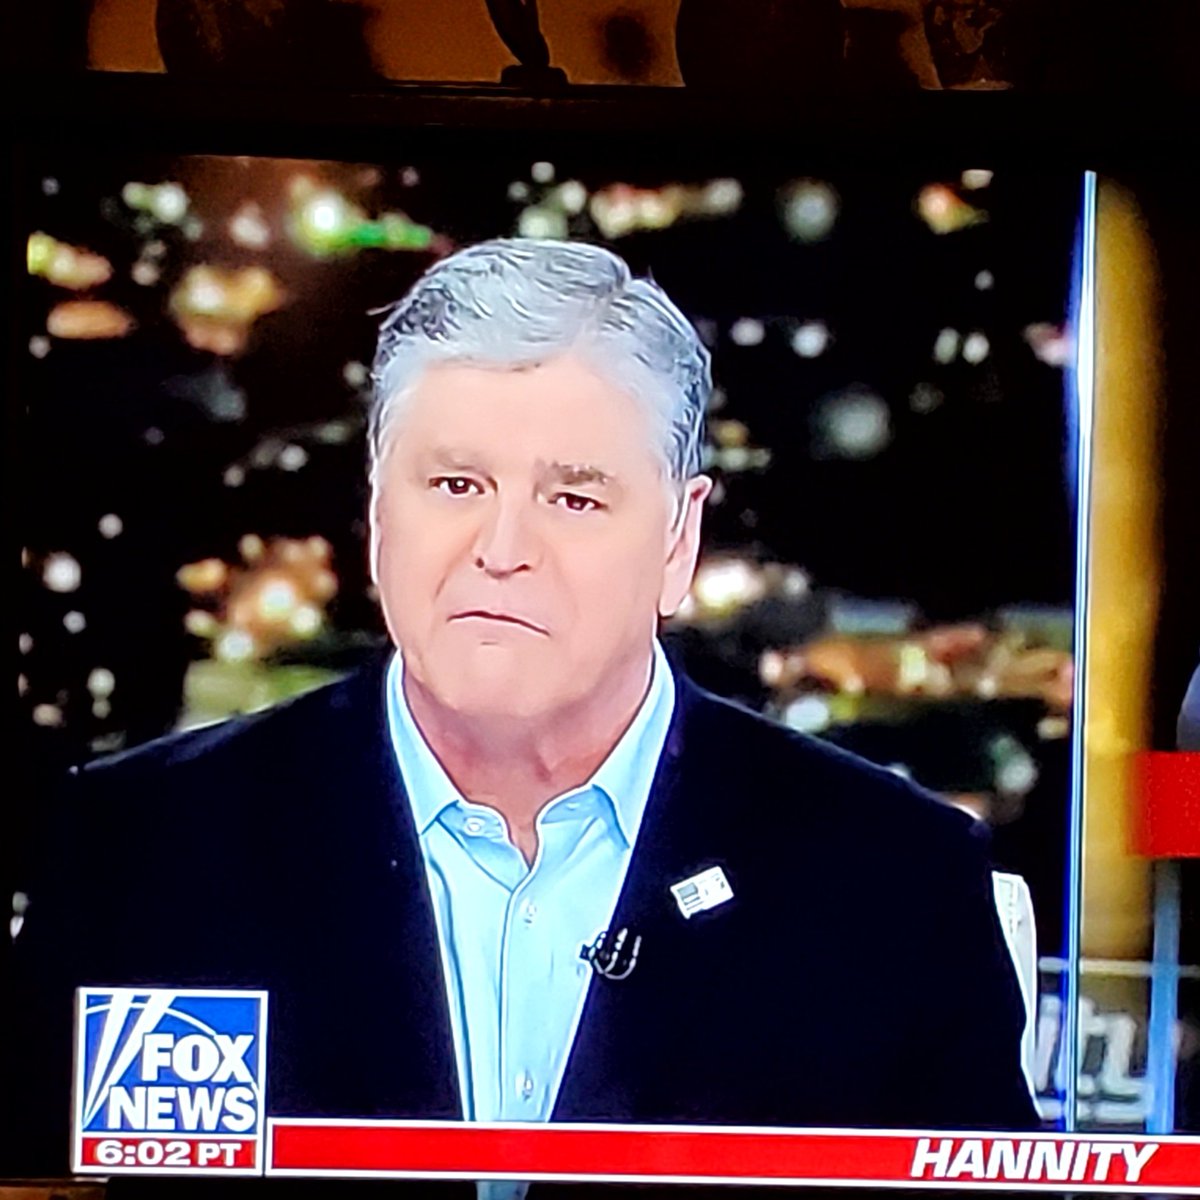 #SeanHannity you are not indispensable. You could be next on the chopping block. Too much personal attack on #Democrats is not news and not objective opinion.